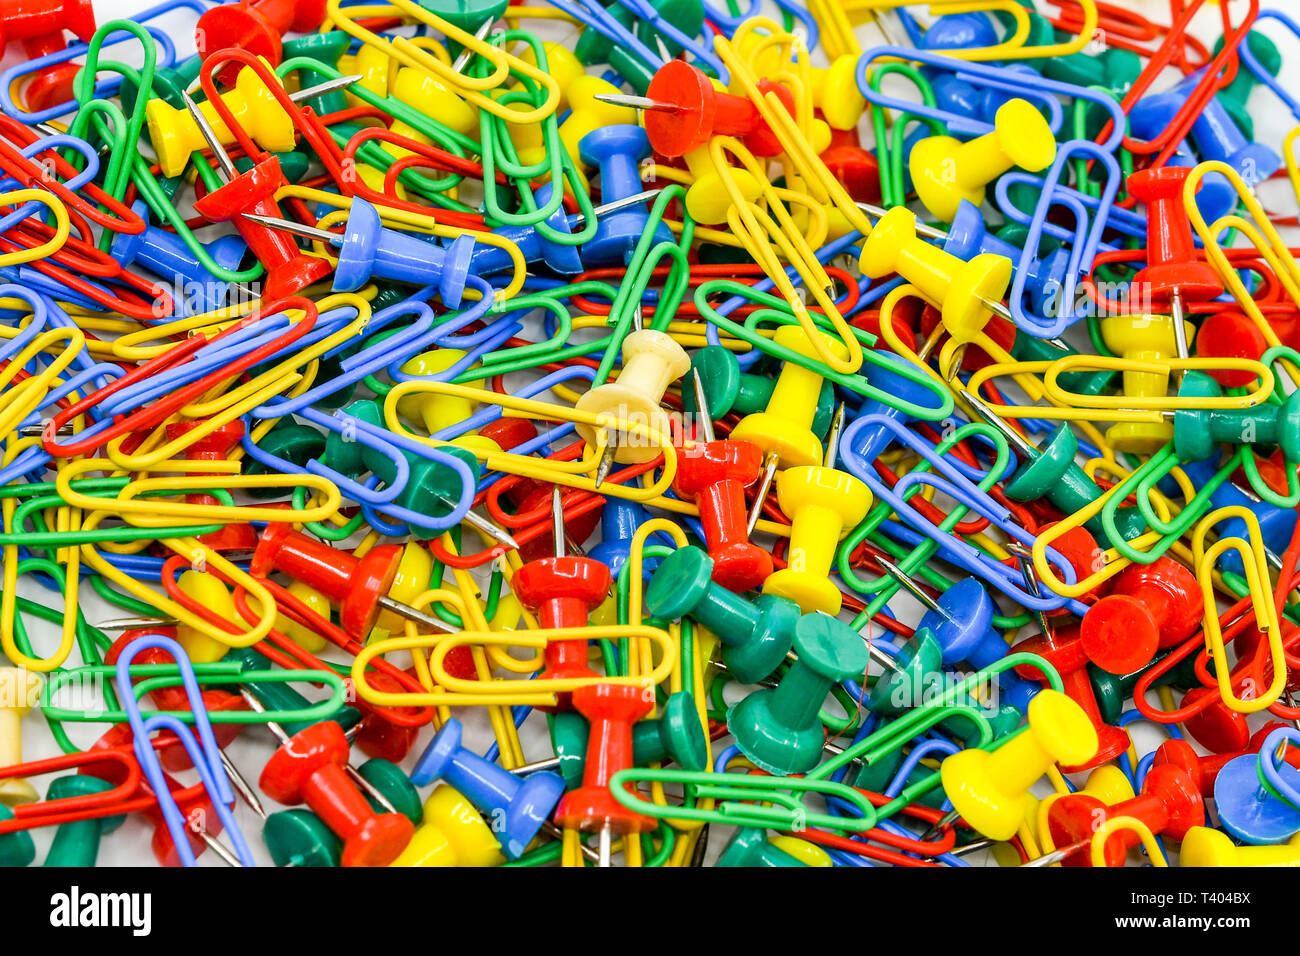 Multicolored paper clips and plastic drawing pins Stock Photo